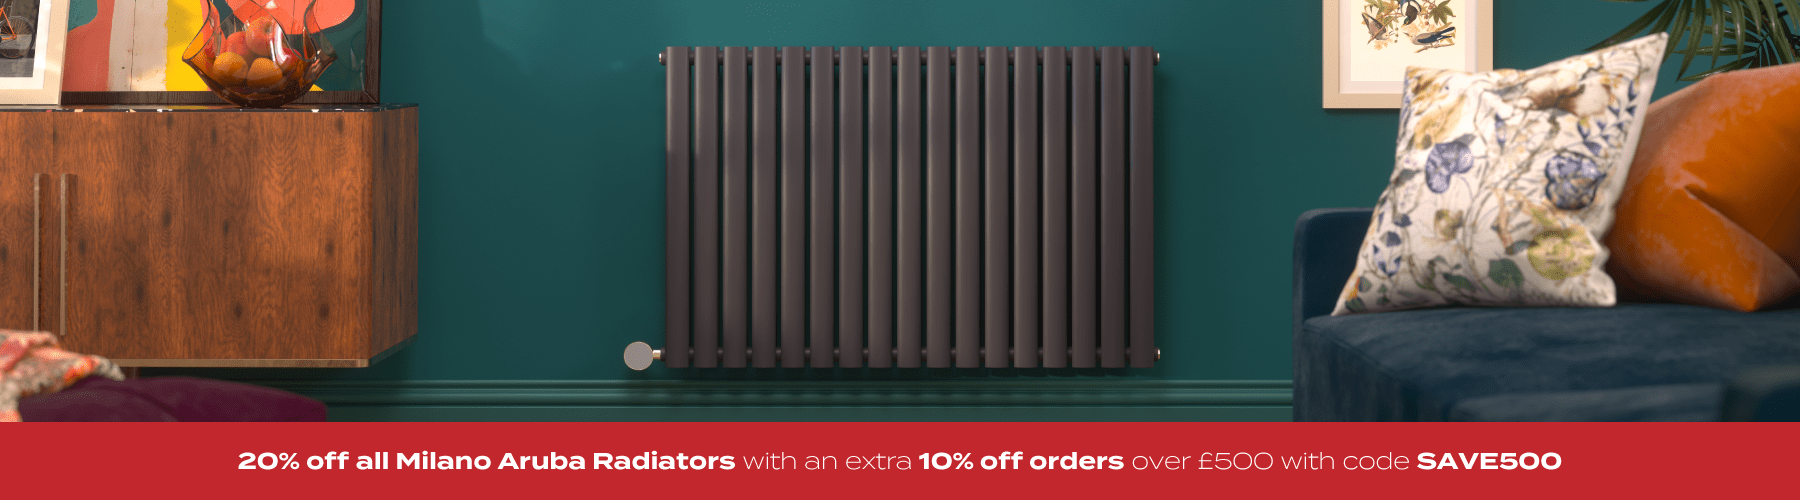  20% off All Milano Aruba Radiators with an extra 10% off orders over £500 with code SAVE500 